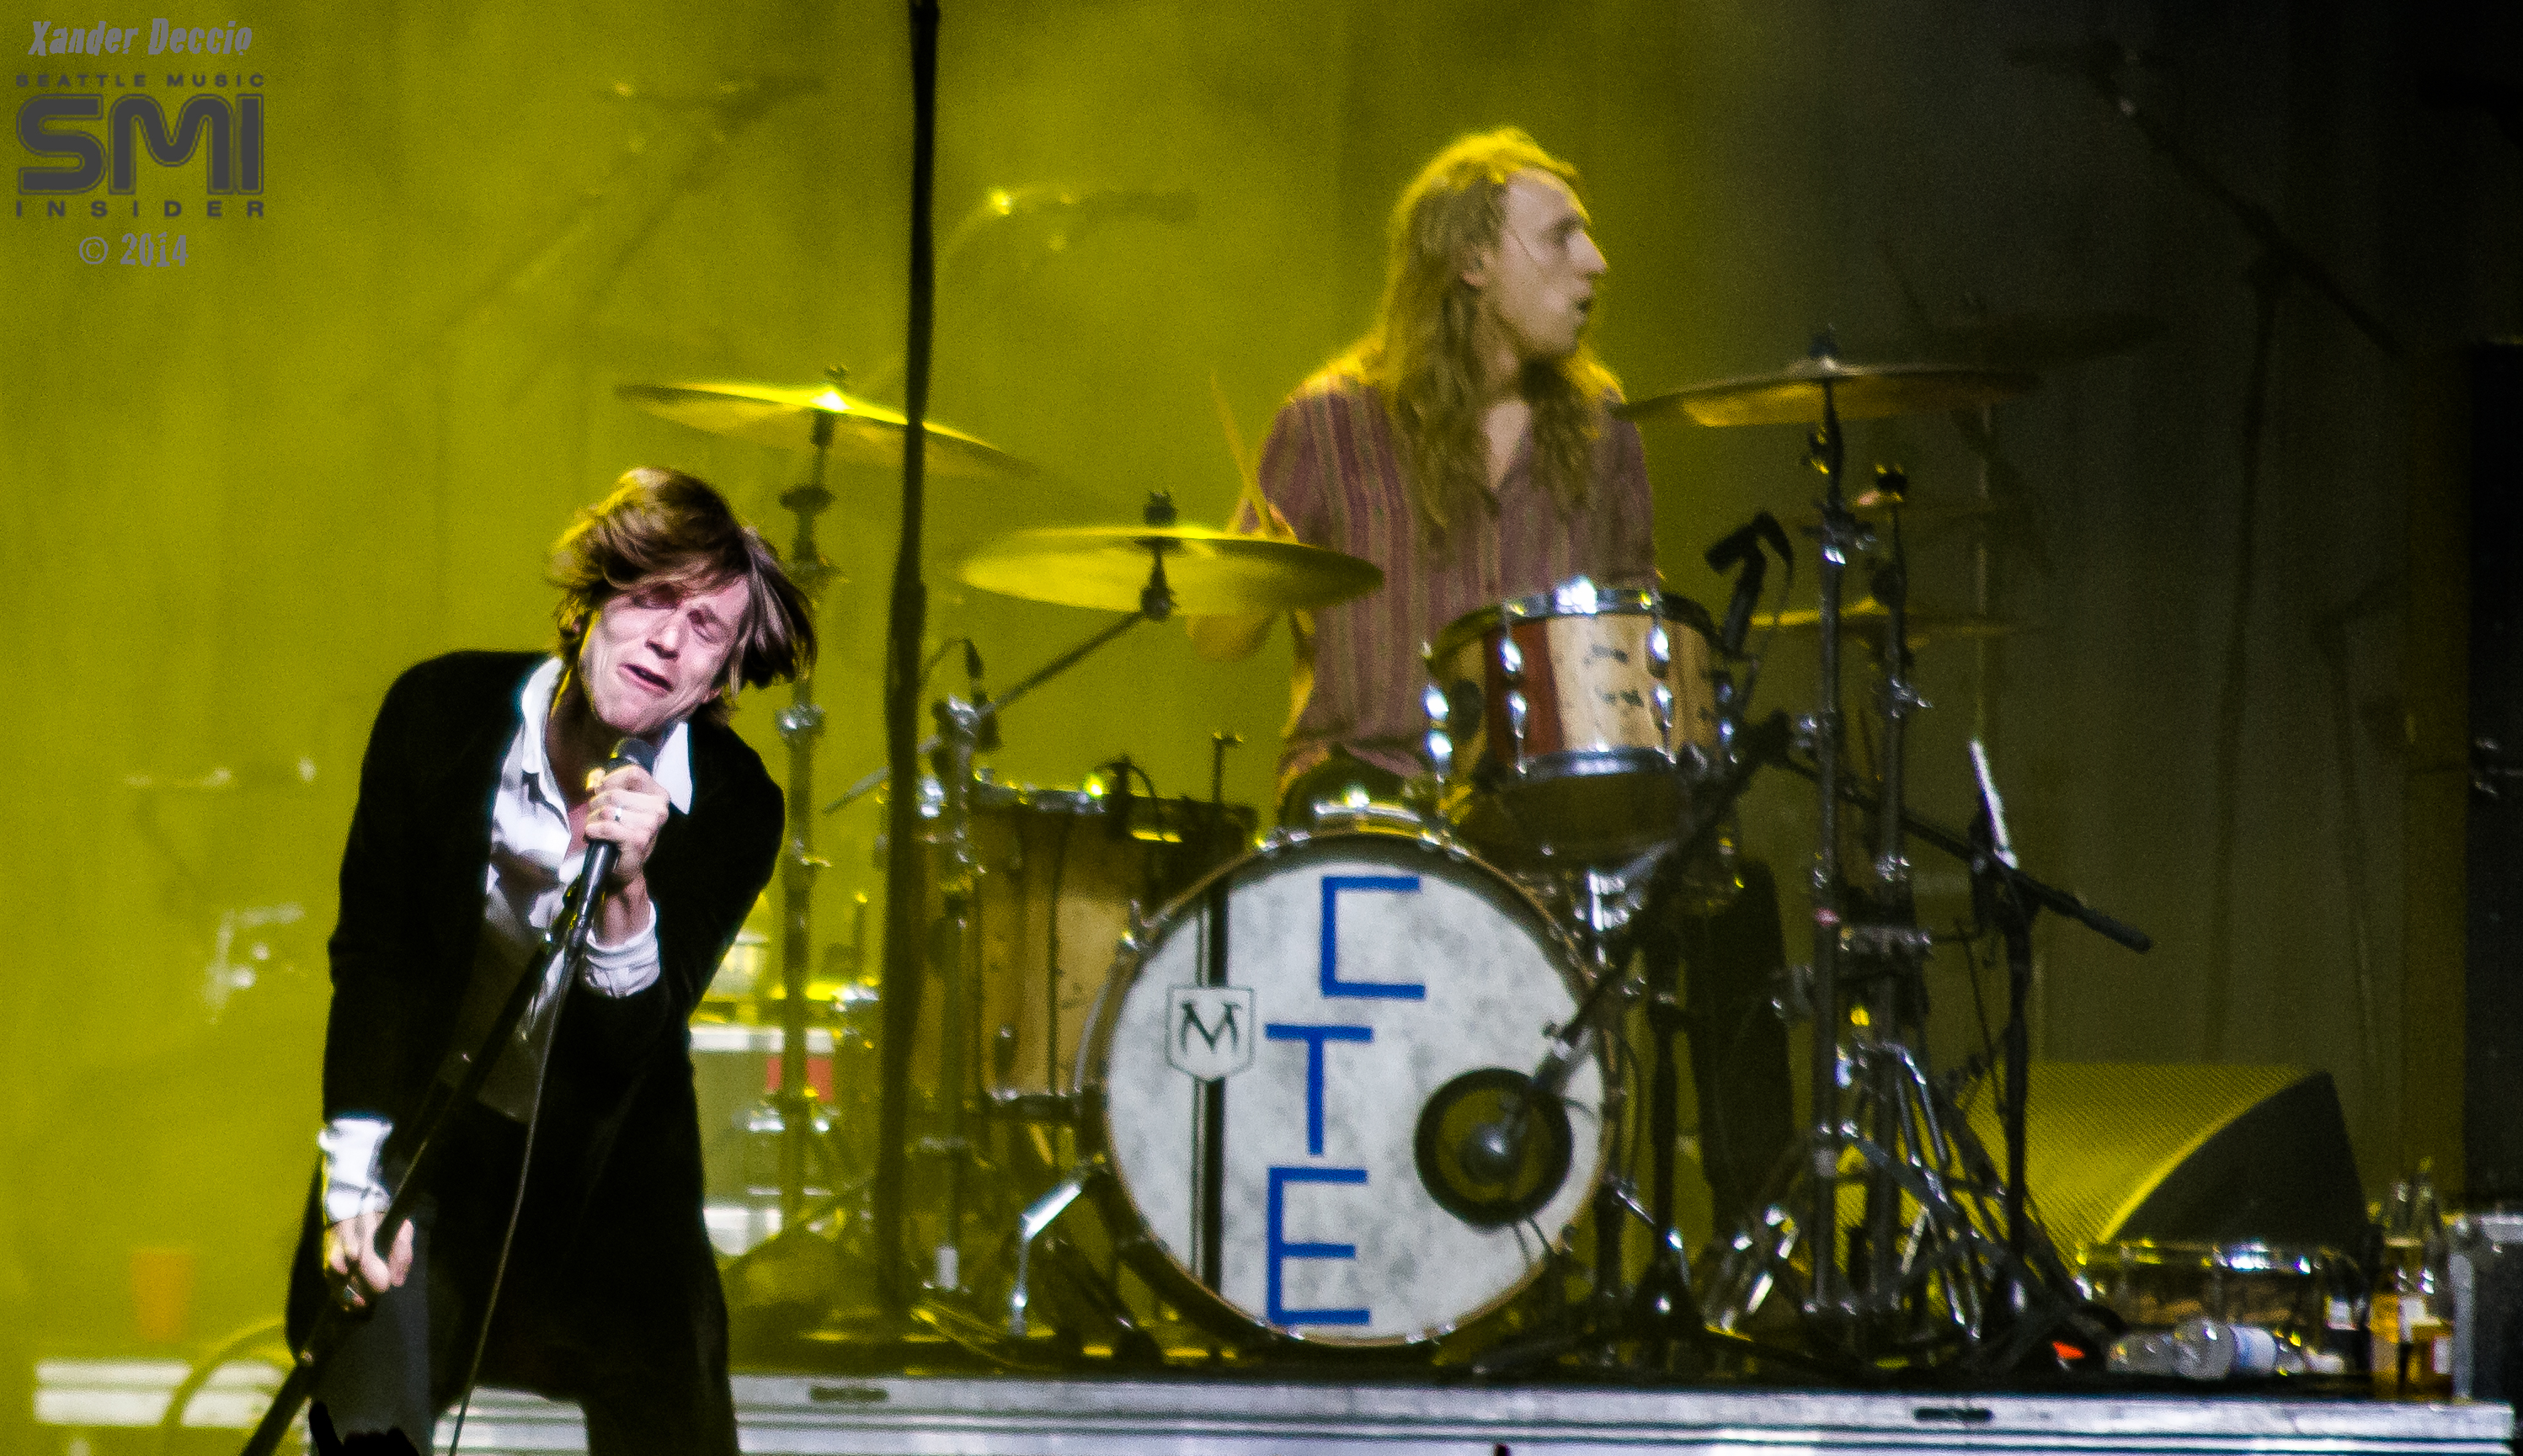 Cage The Elephant @ Deck The Hall Ball 2014 – Photo By Xander Deccio